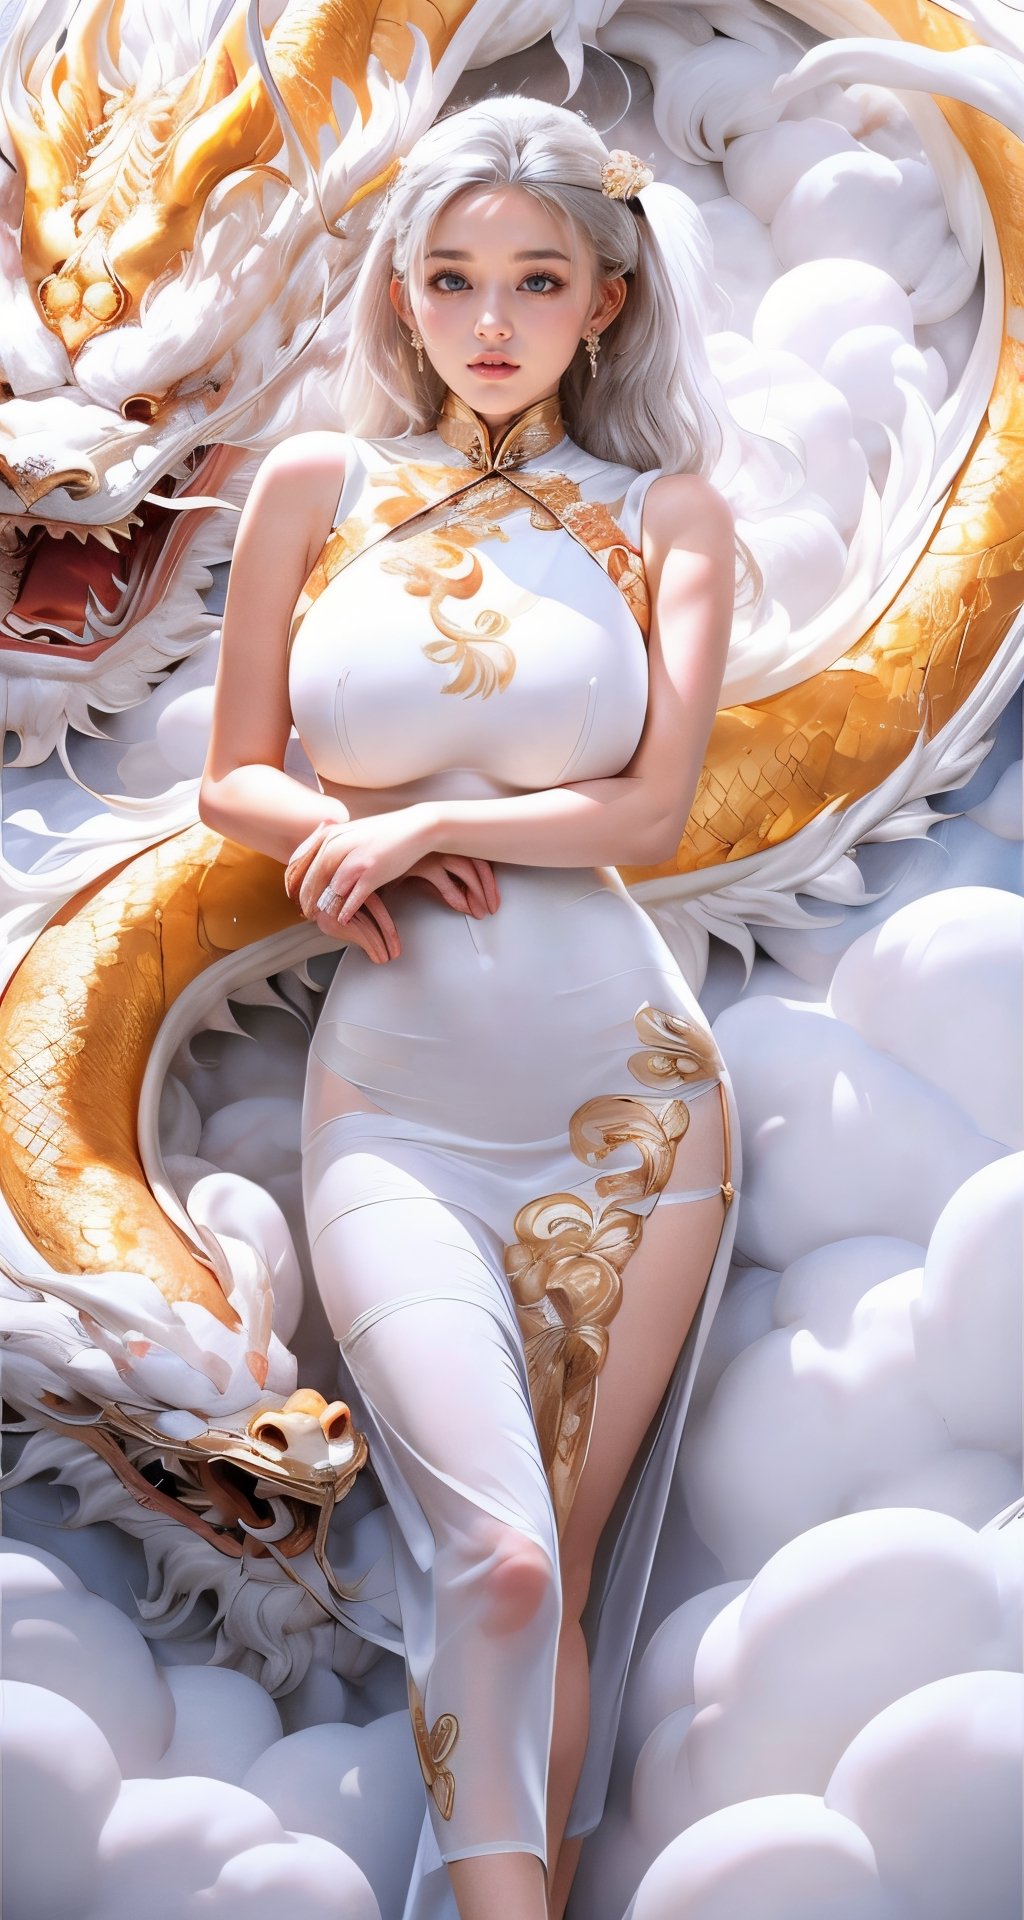 unparalleled masterpiece, perfect artwork, 8k, Ultra realistically, by Alphonse Mucha, art nouveau, (nsfw:1),
(long cheongsam:1) , (transparent and thin dress:1.4), (tight dress:1.3), gold leaf covered, dragonbaby, (chinese dragon:1.3), Gorgeous, (huge breasts :1.2), legs, laying on the dragon, 
extremely detailed, (bangs:1.4), look at viewer,
long hair,  (white hair:1.3), mature female,  (smile:0.8), white skin, skinny,  moles, earrings, China, flowers, floral patterns, color pattern, sunlight, cloud, luxury, twine, ocean, wedding,